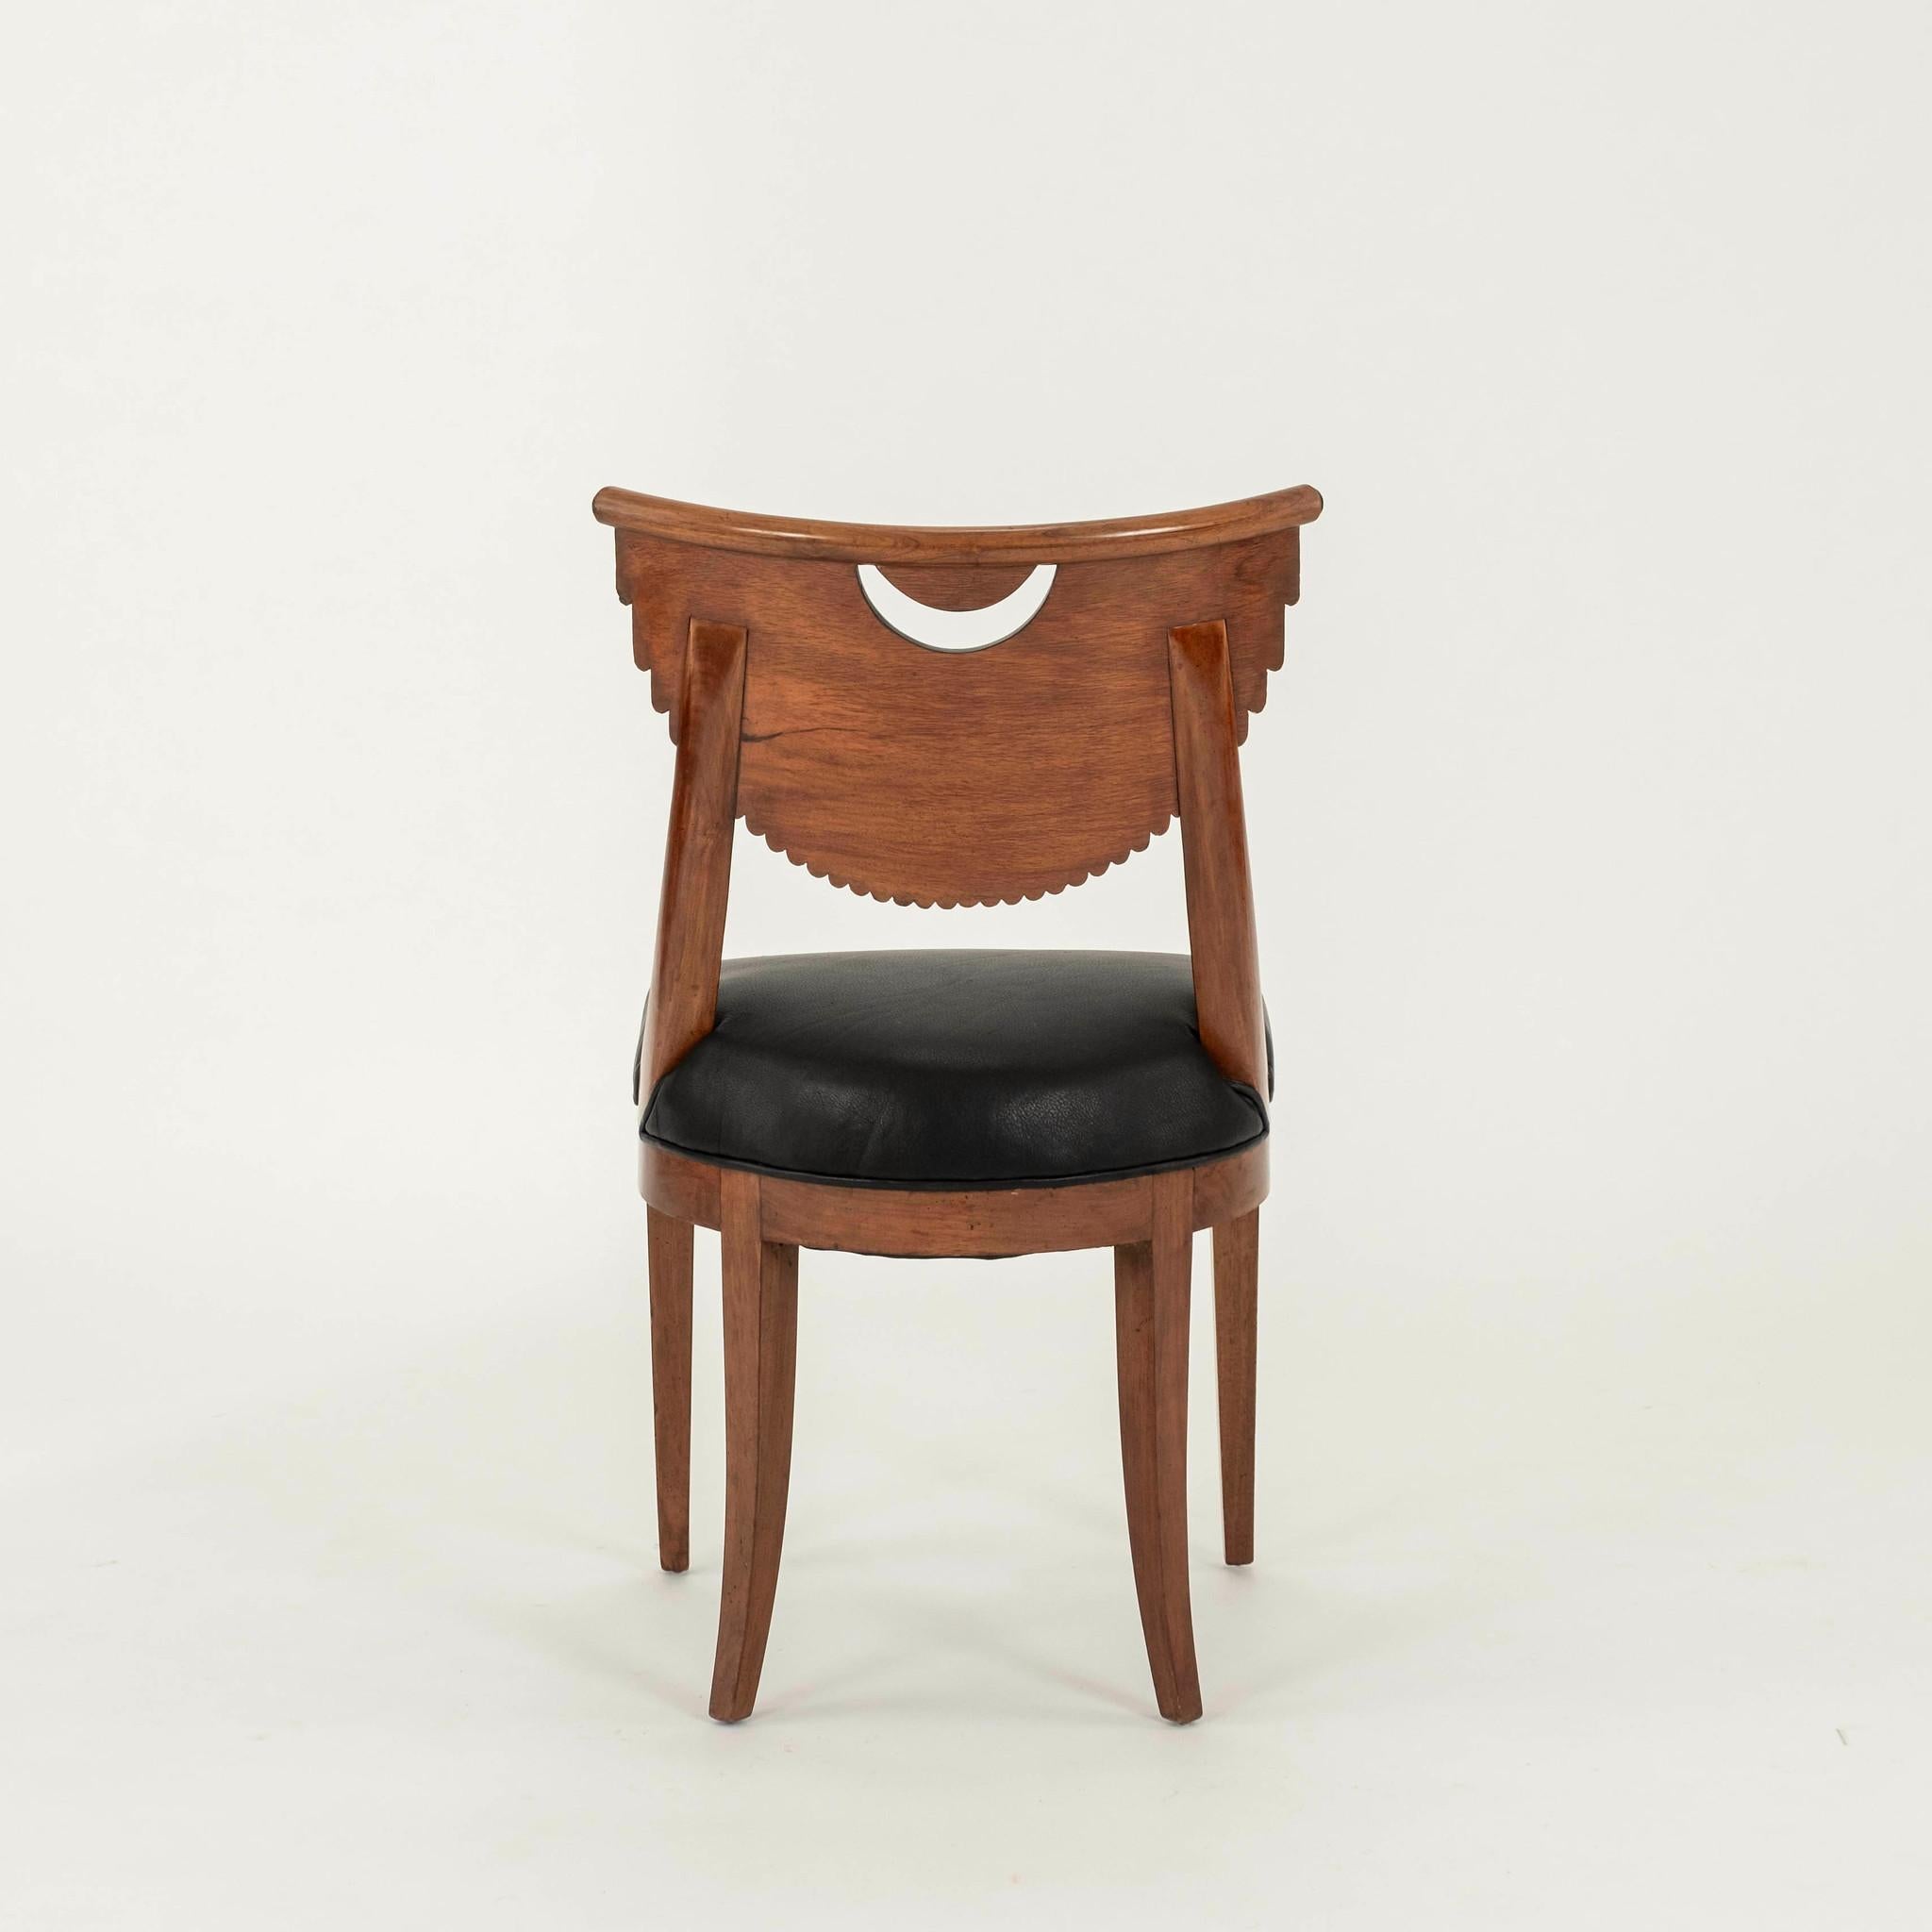 Early 19th Century Swedish Biedermeier hardwood chair. This skillfully executed chair has all the right curves, edge scalloping, polished veneers, ebonized accents and a handsome newly upholstered supple black leather seat.